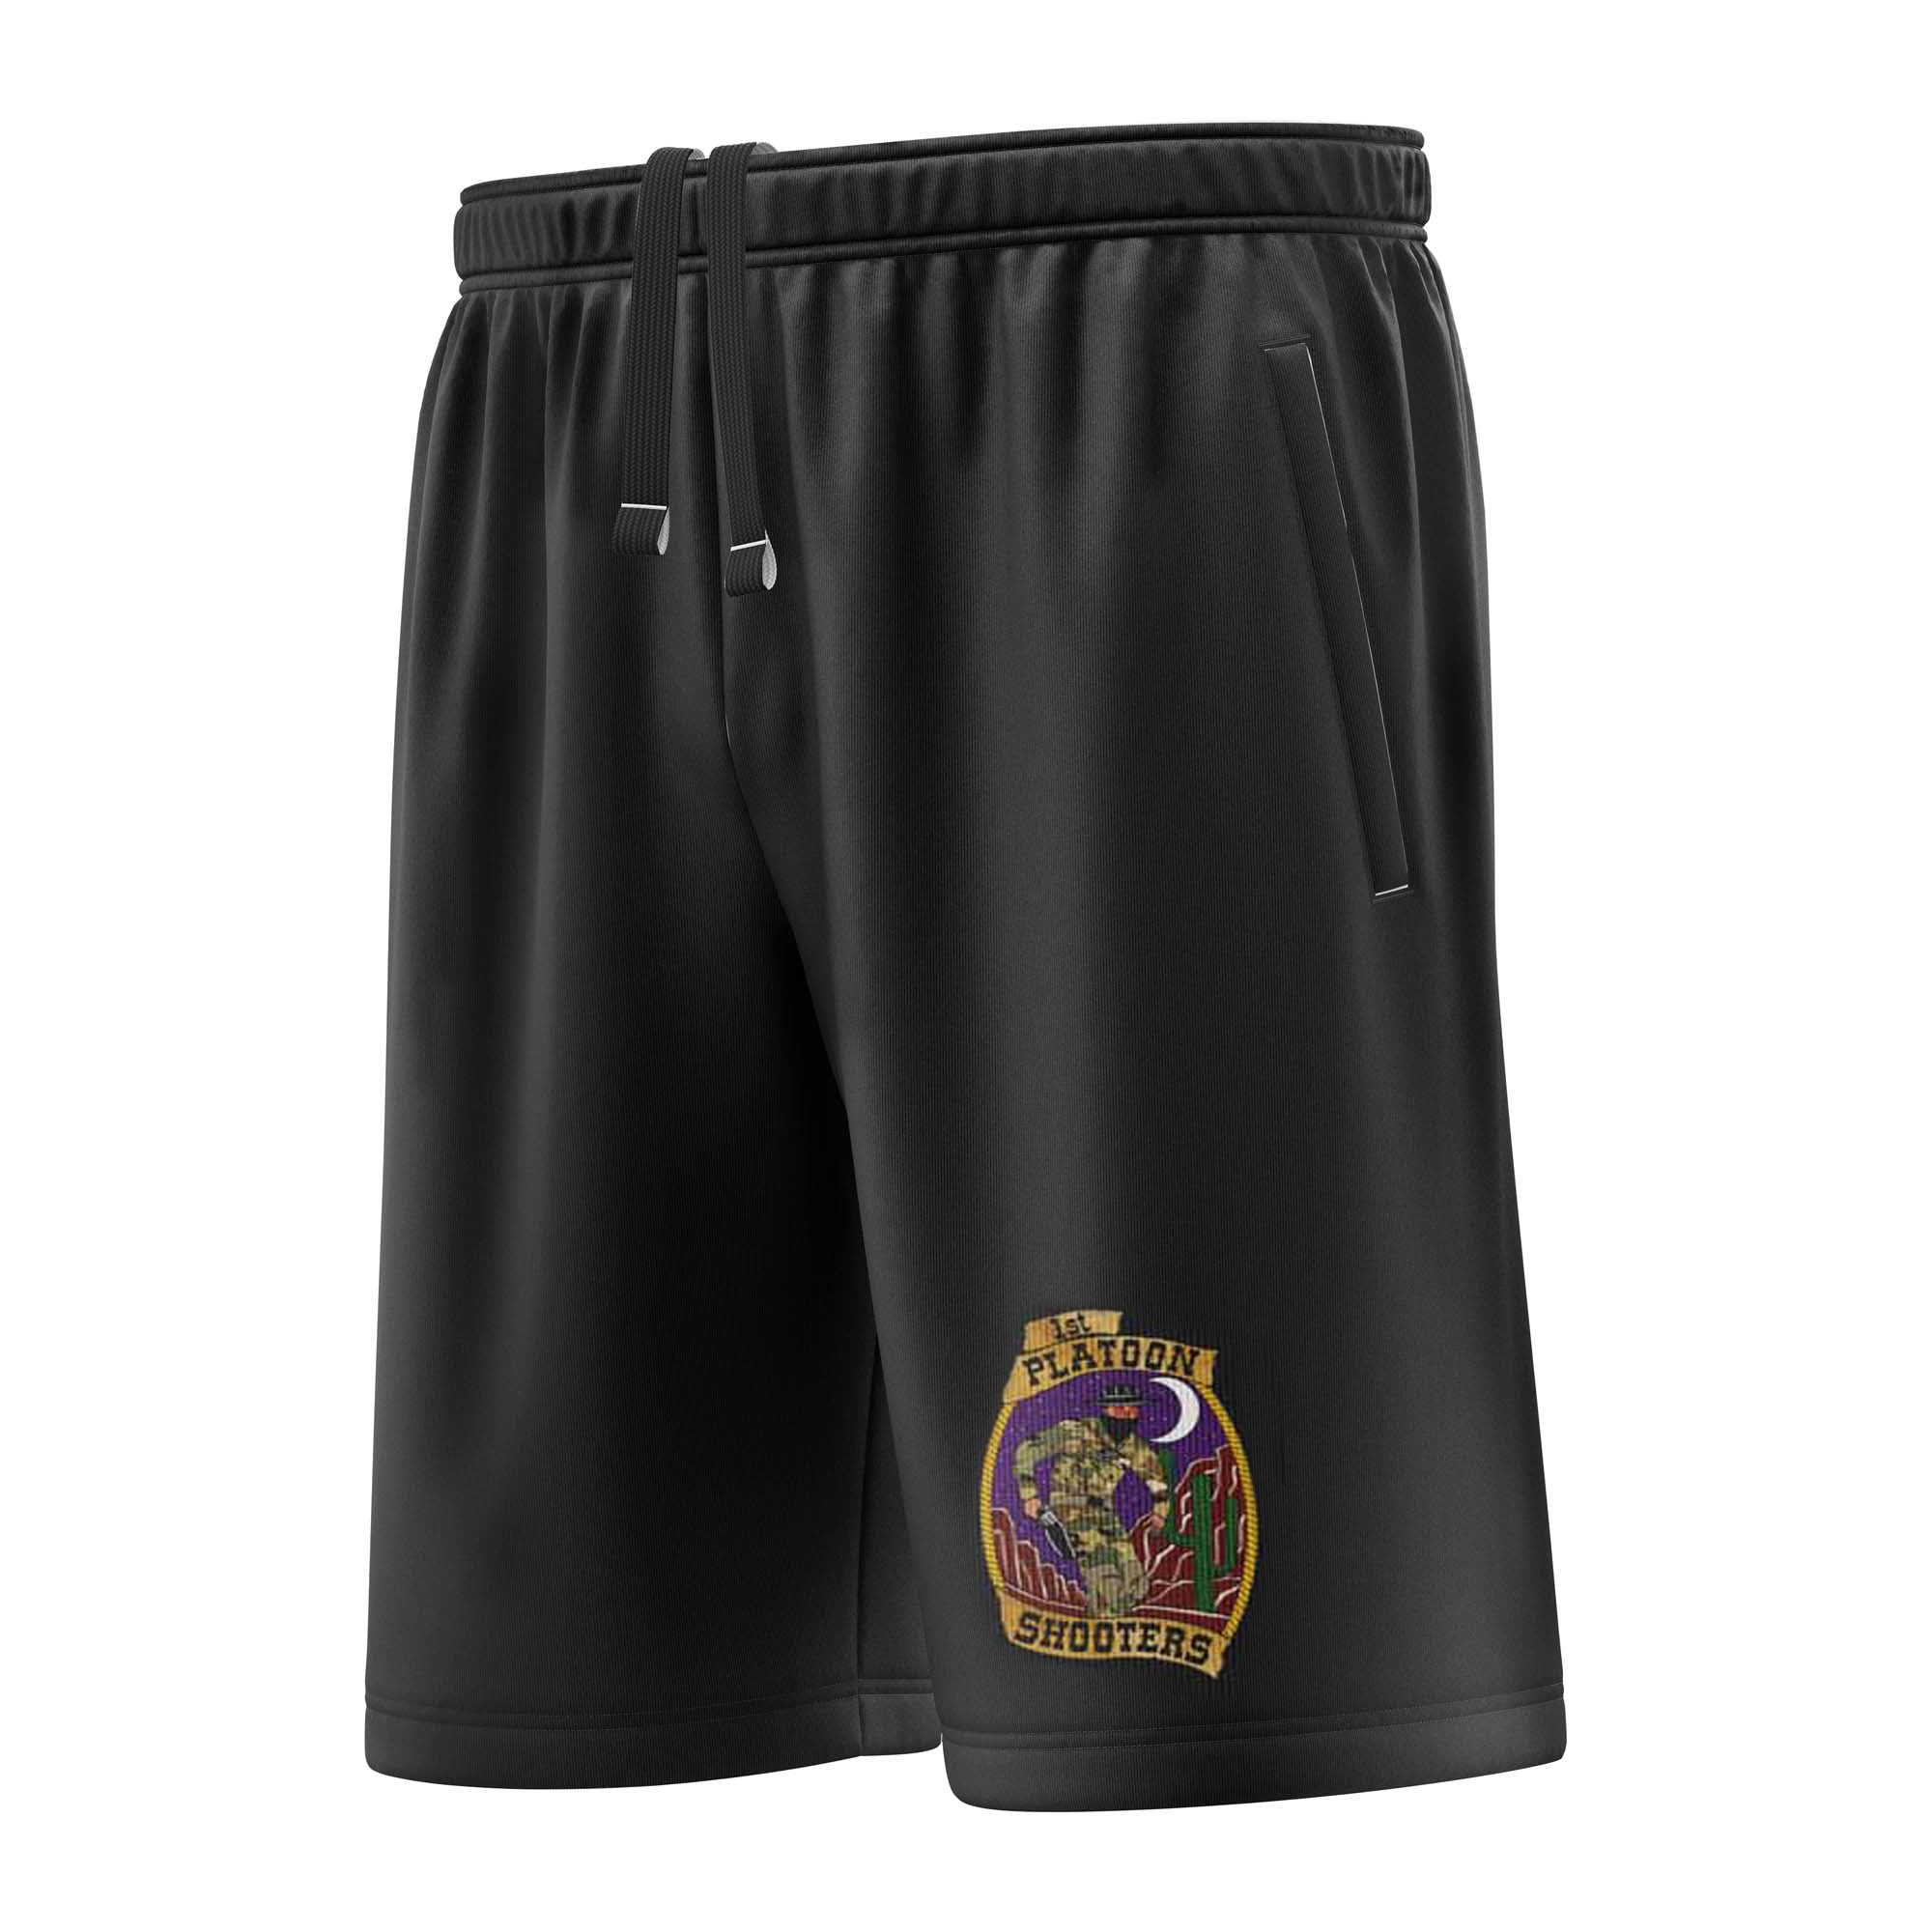 1st Platoon Shooters Single Layer Shorts - 2 Side Pockets (8 inch inseam)